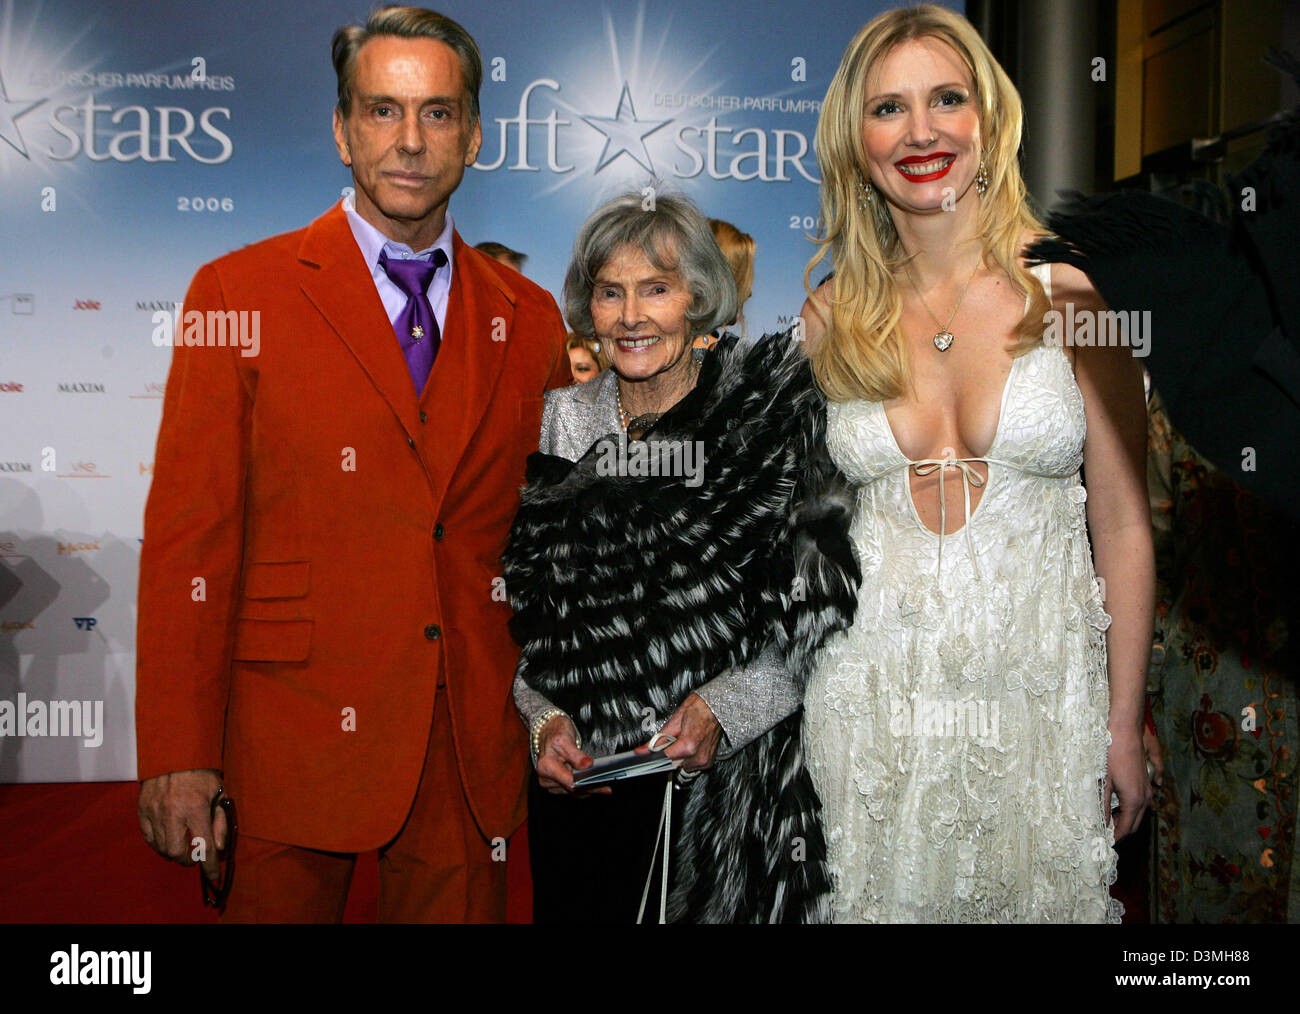 Designer Wolfgang Joop (L), his mother Charlotte (C) and his daughter,  designer Jette Joop (R), pictured at the Gala Fragrance stars 2006 in the  Ullstein hall, Berlin, Germany, 17 March 2006. For